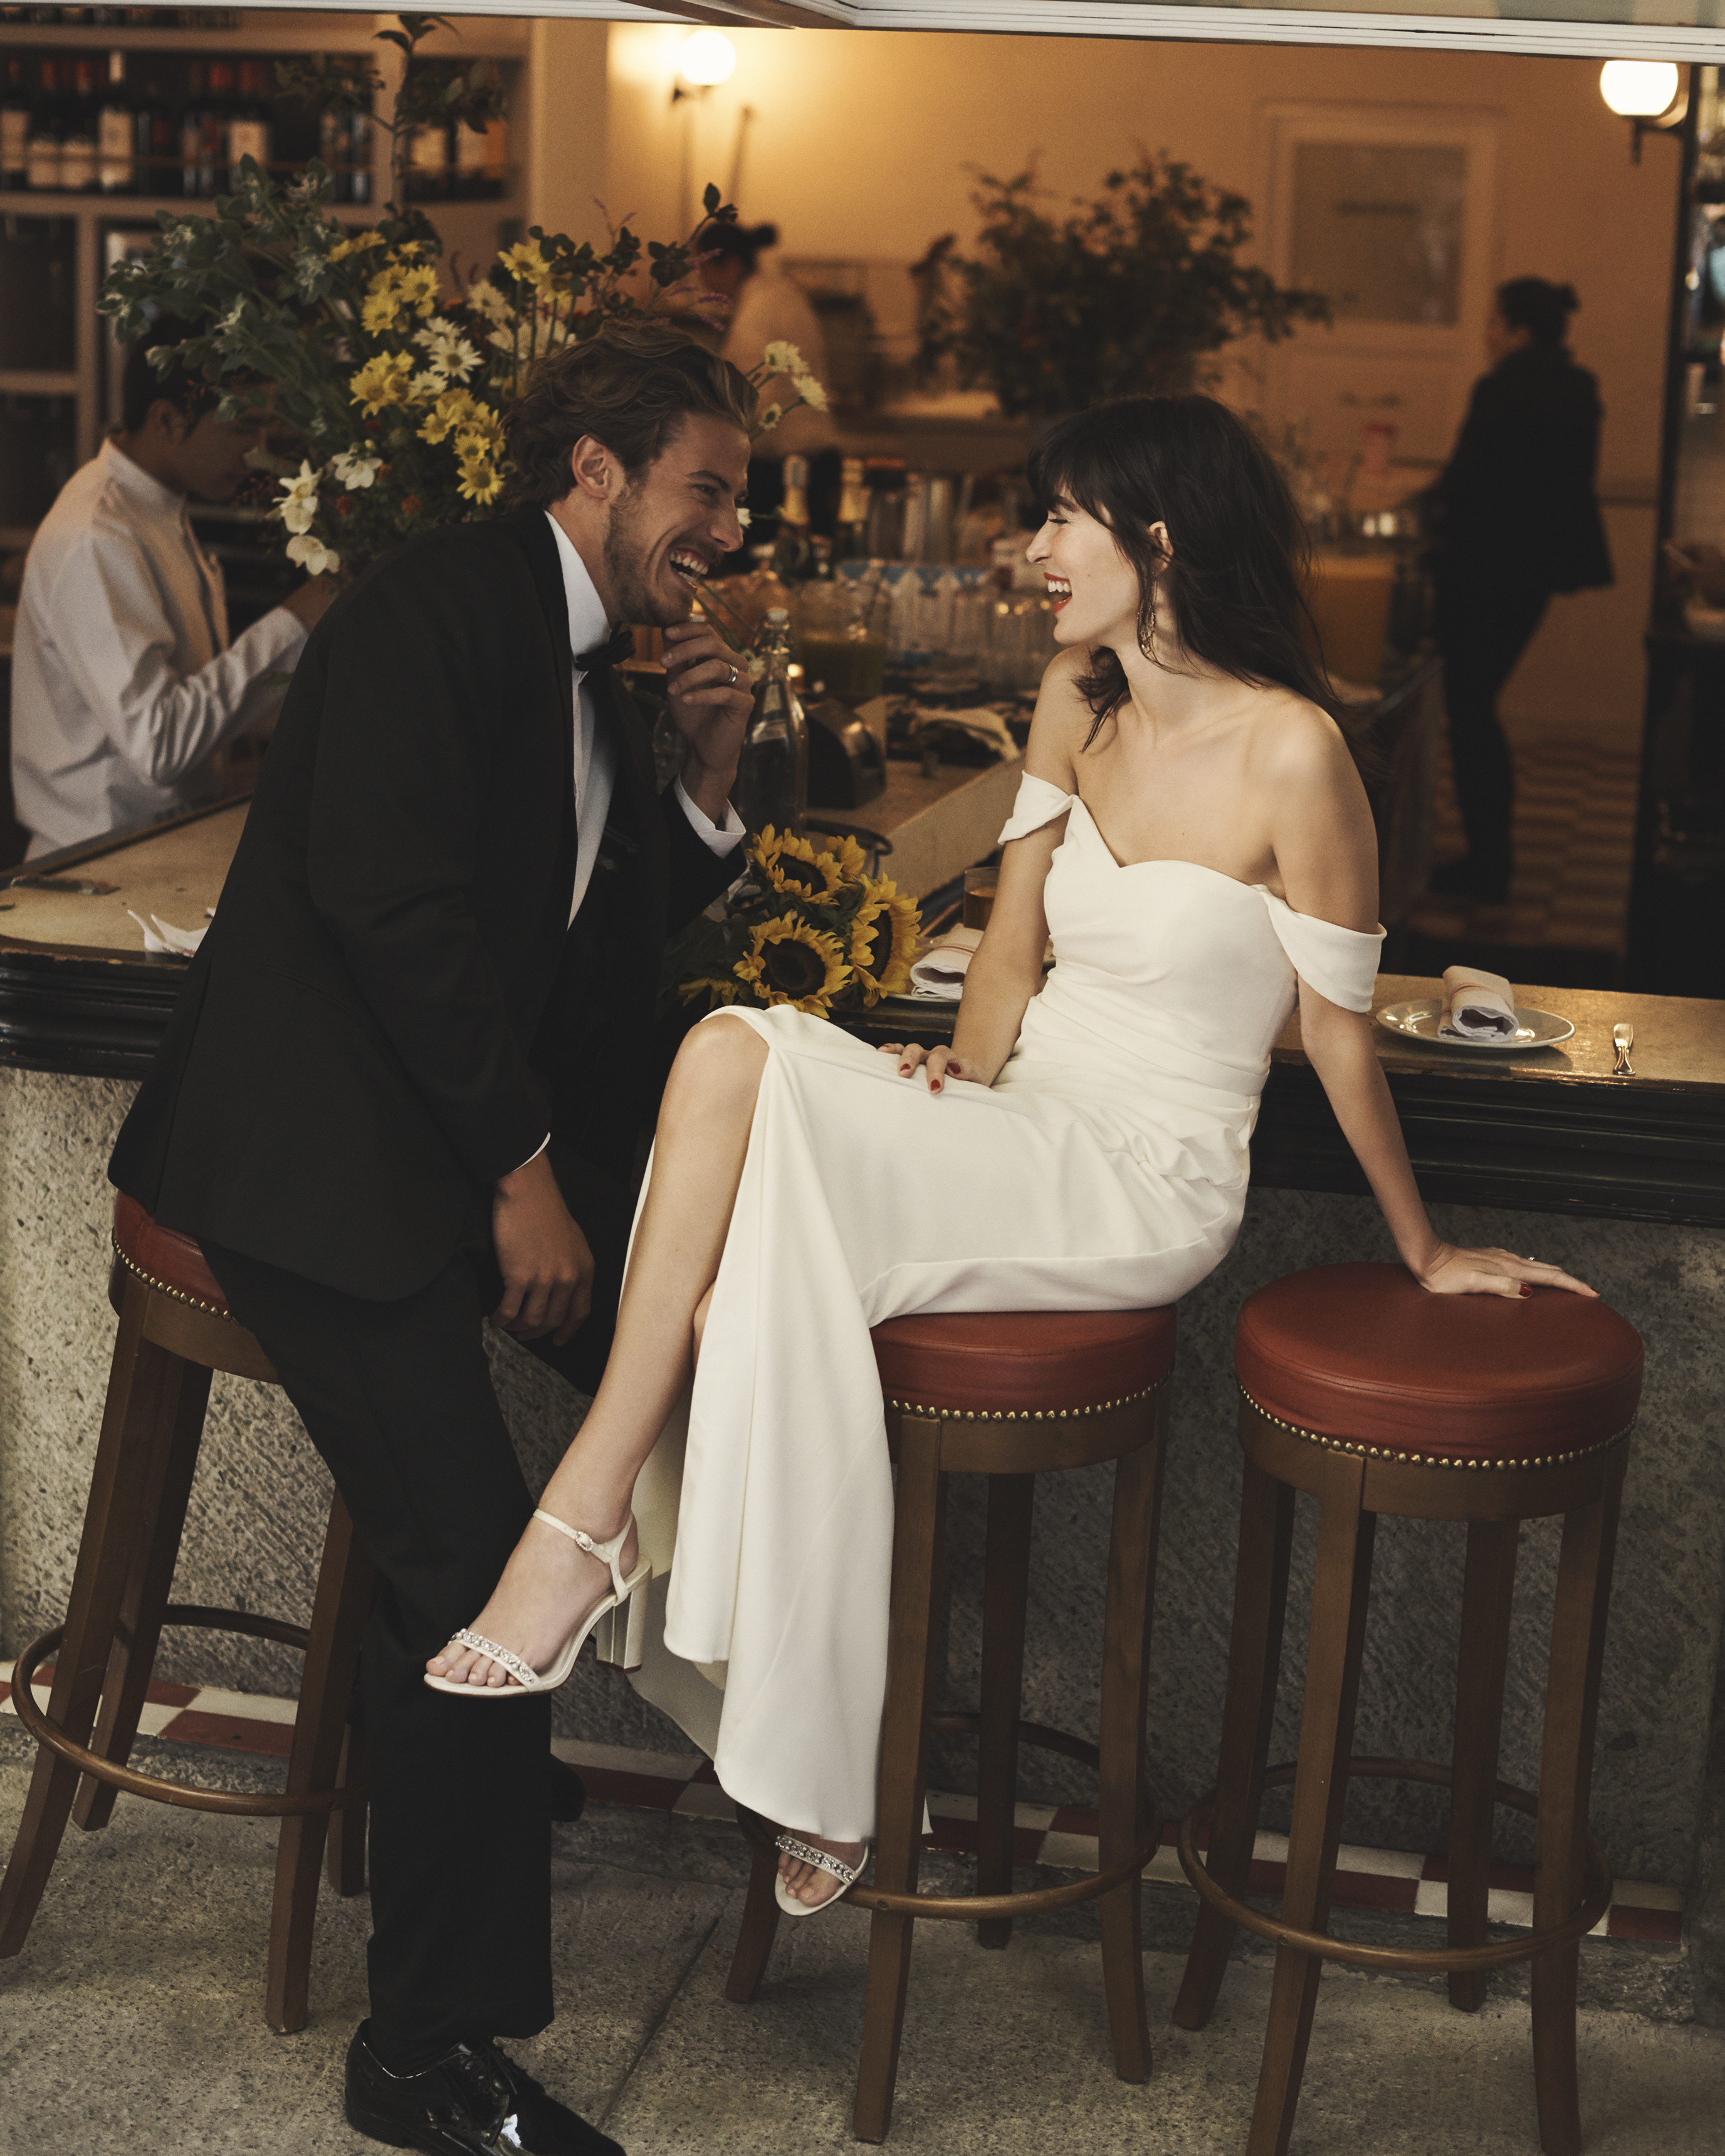 Groom in tux and bride in off-the-shoulder dress smiling in cafe